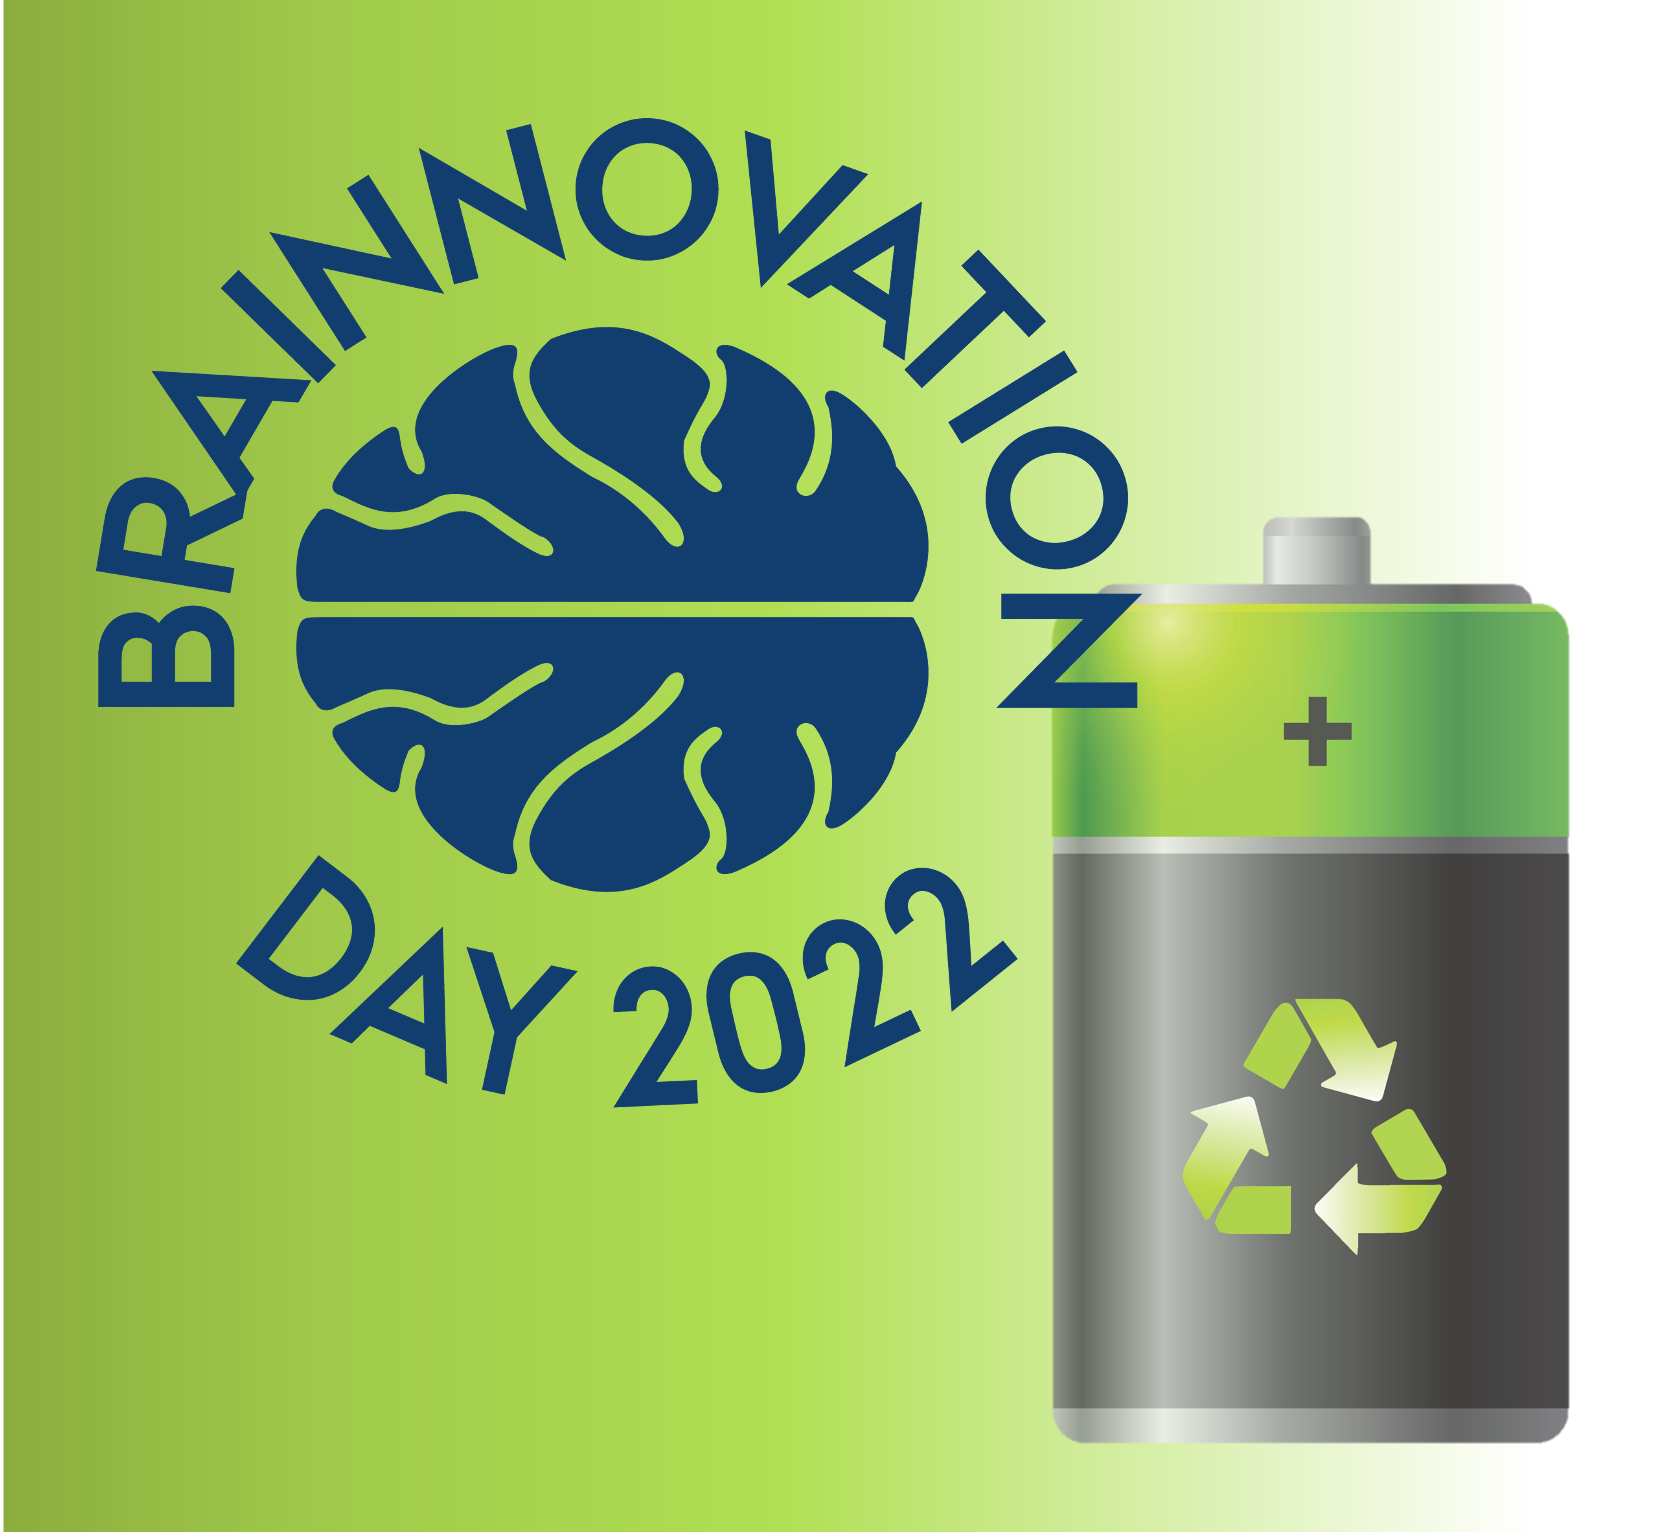 On November 16, 2022, industry and academia came together to discuss challenges in connection with battery materials and their recycling at the 8th Brainnovation Day at Aarhus University